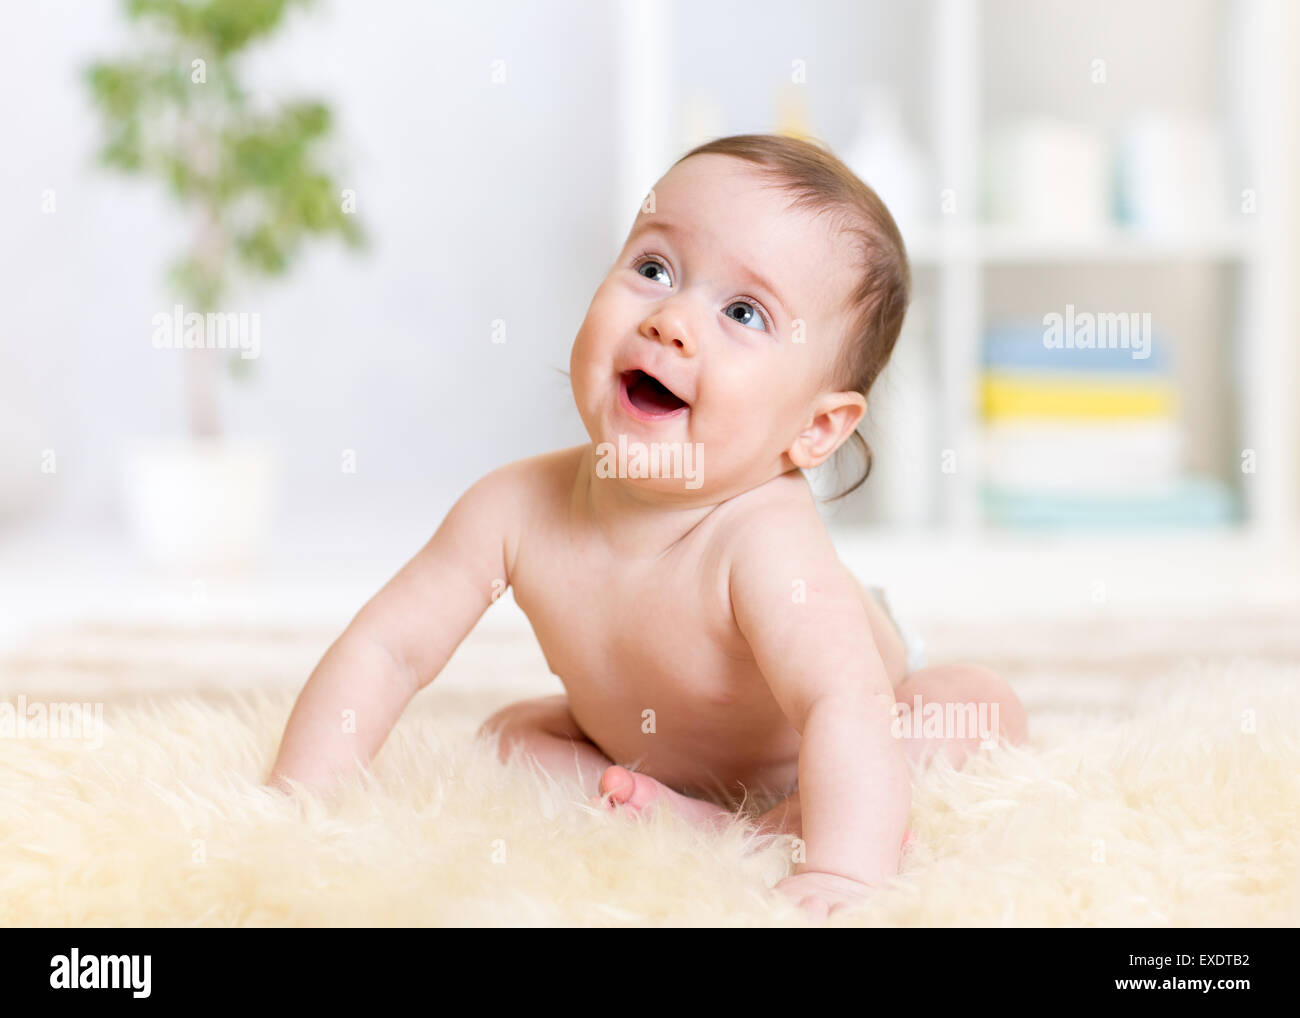 baby sitting on floor at home Stock Photo